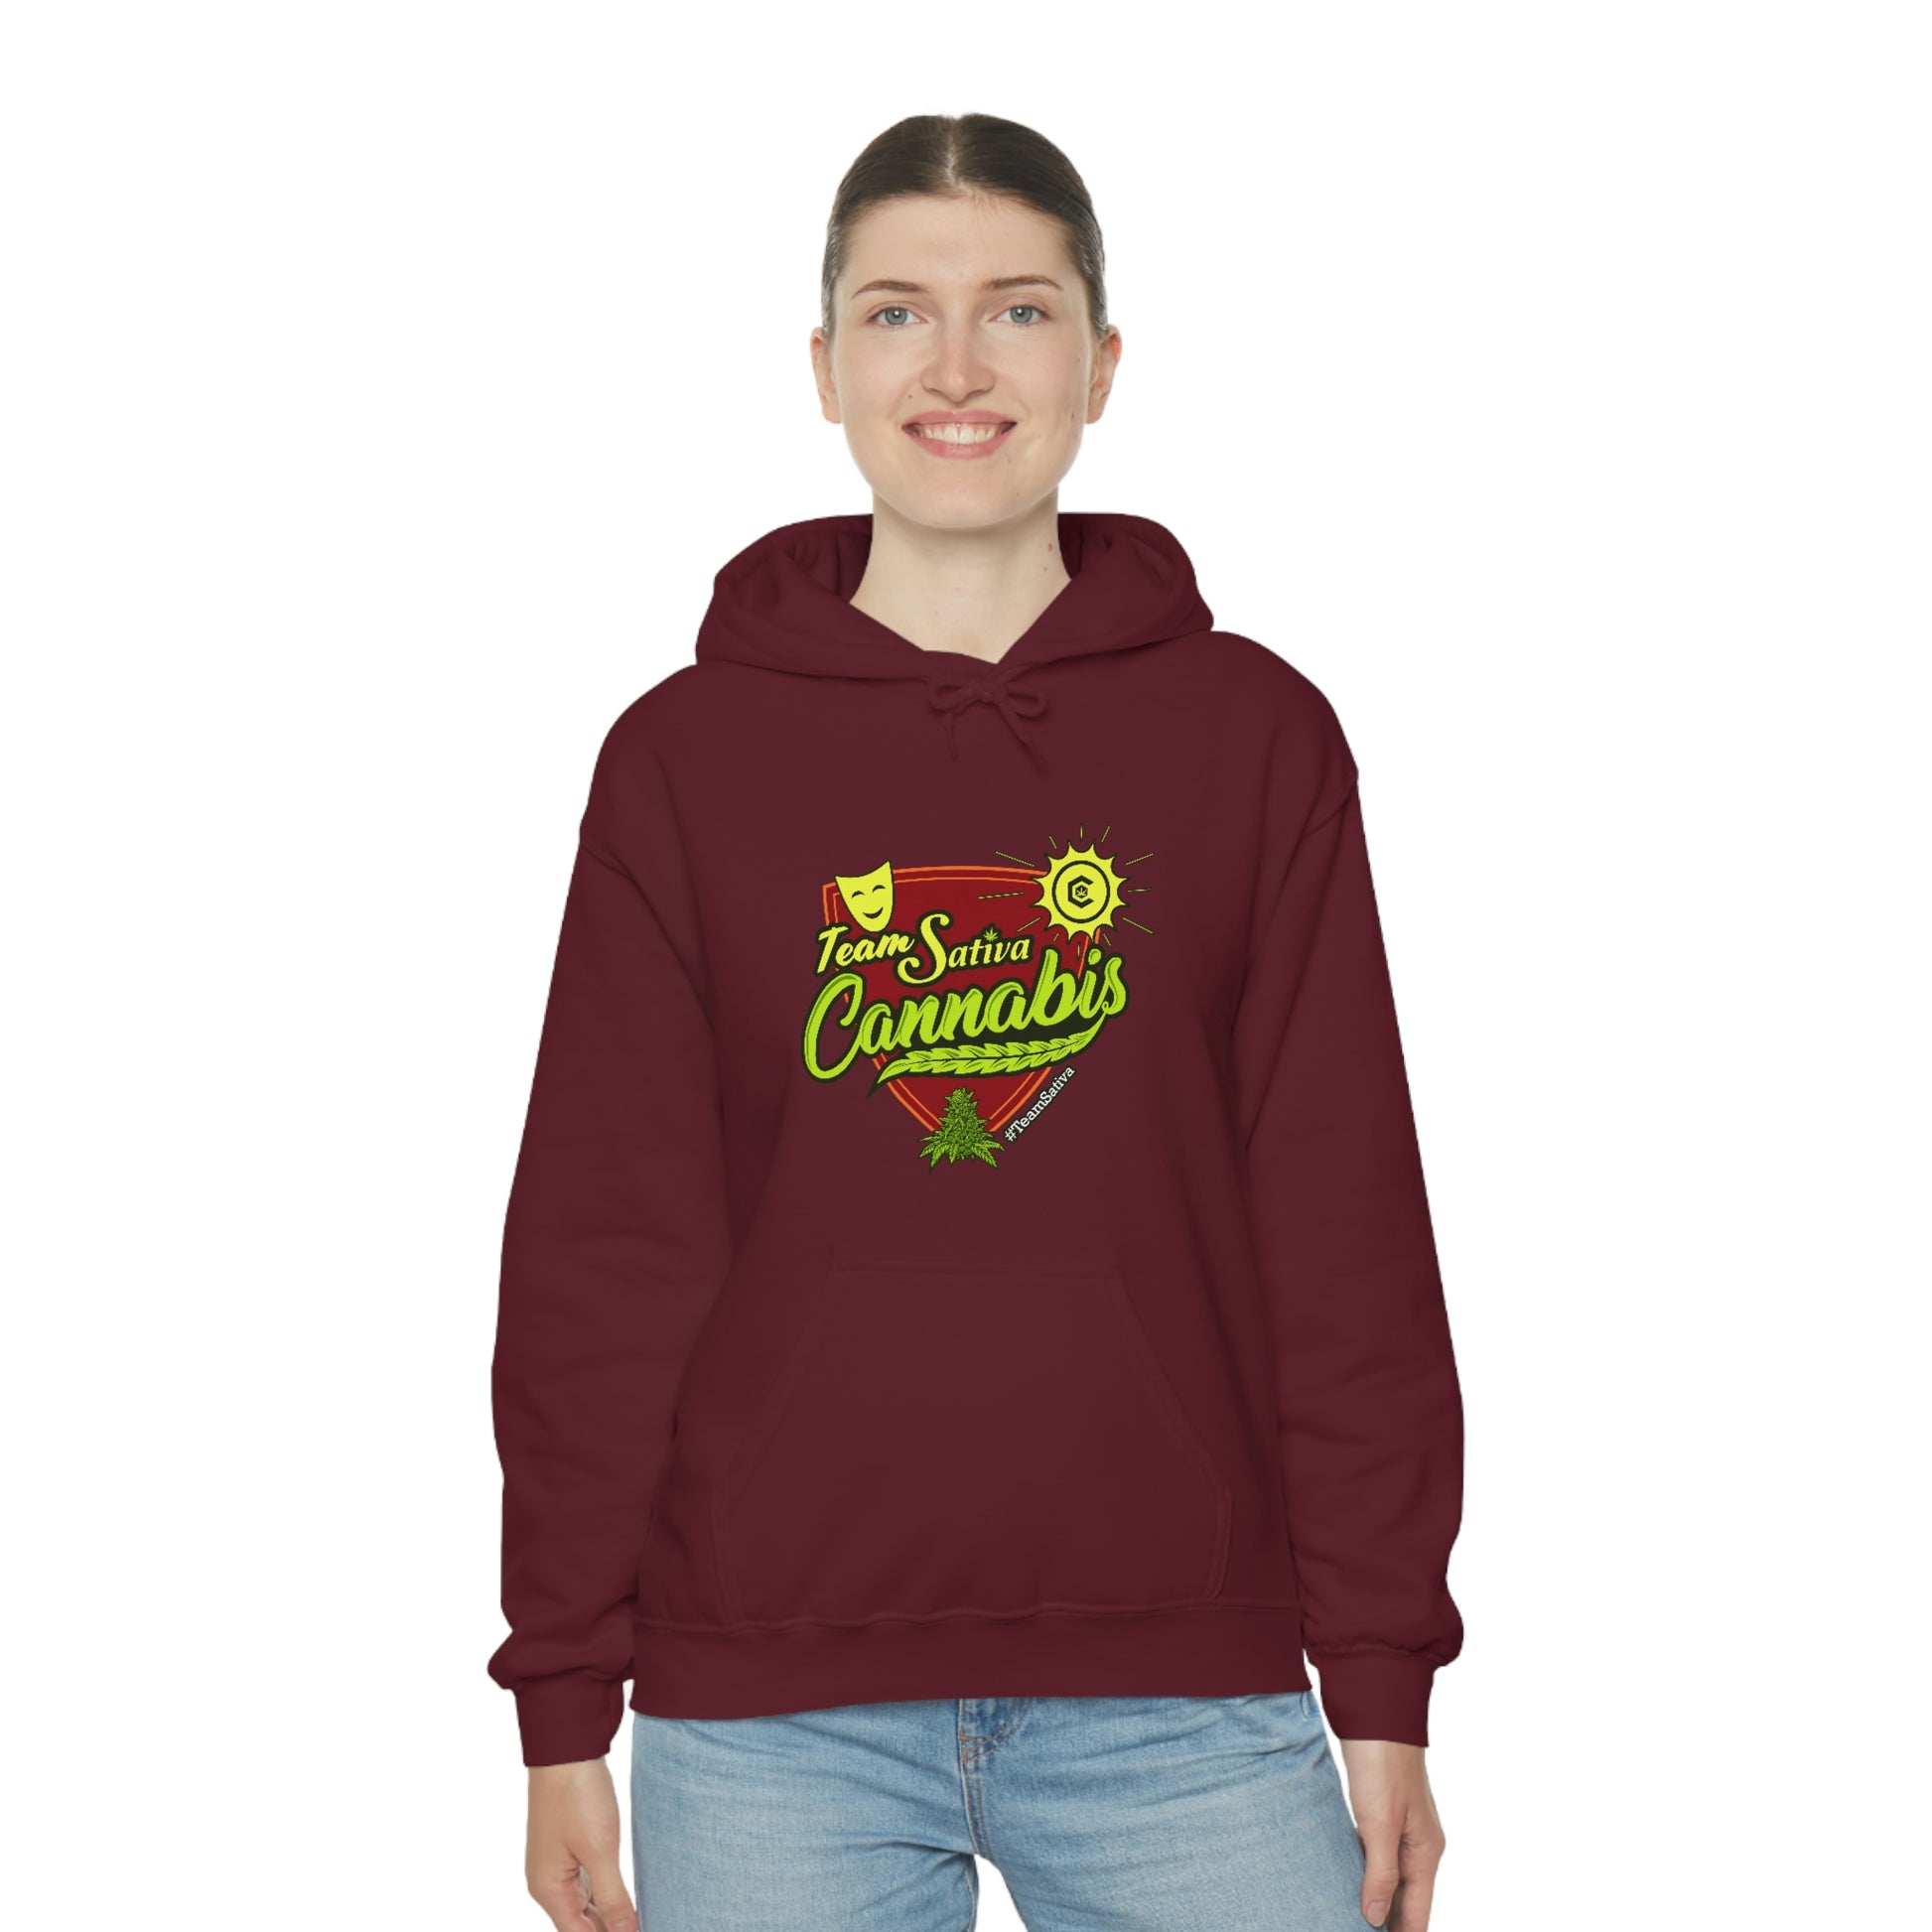 a woman wearing a maroon hoodie with the name "Team Sativa Stoner" on it.